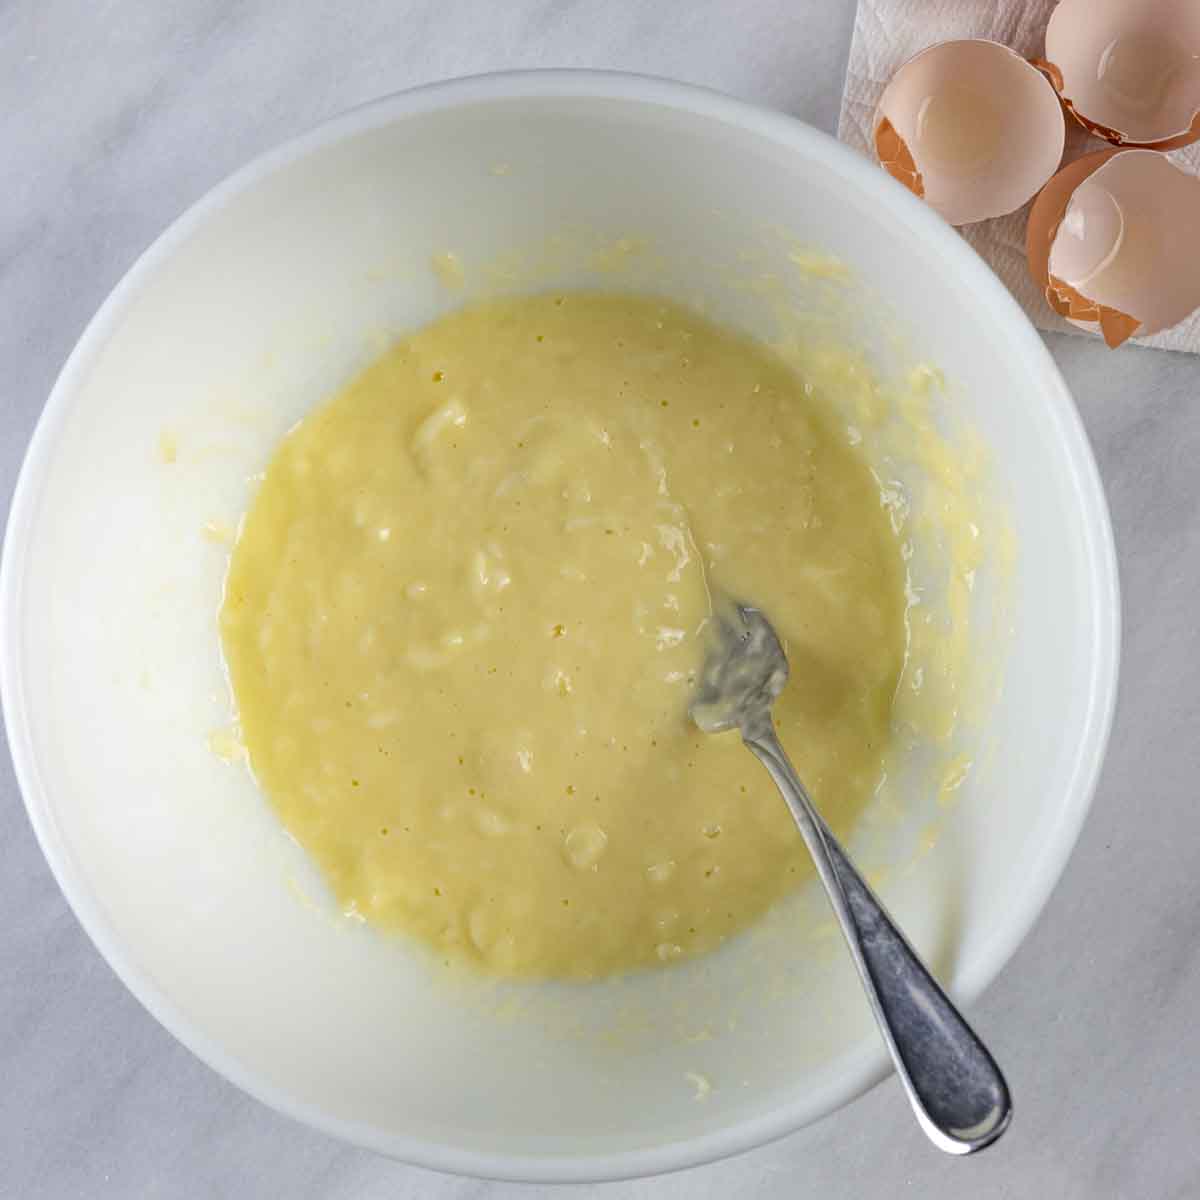 Eggs stirred into cheese ingredients.